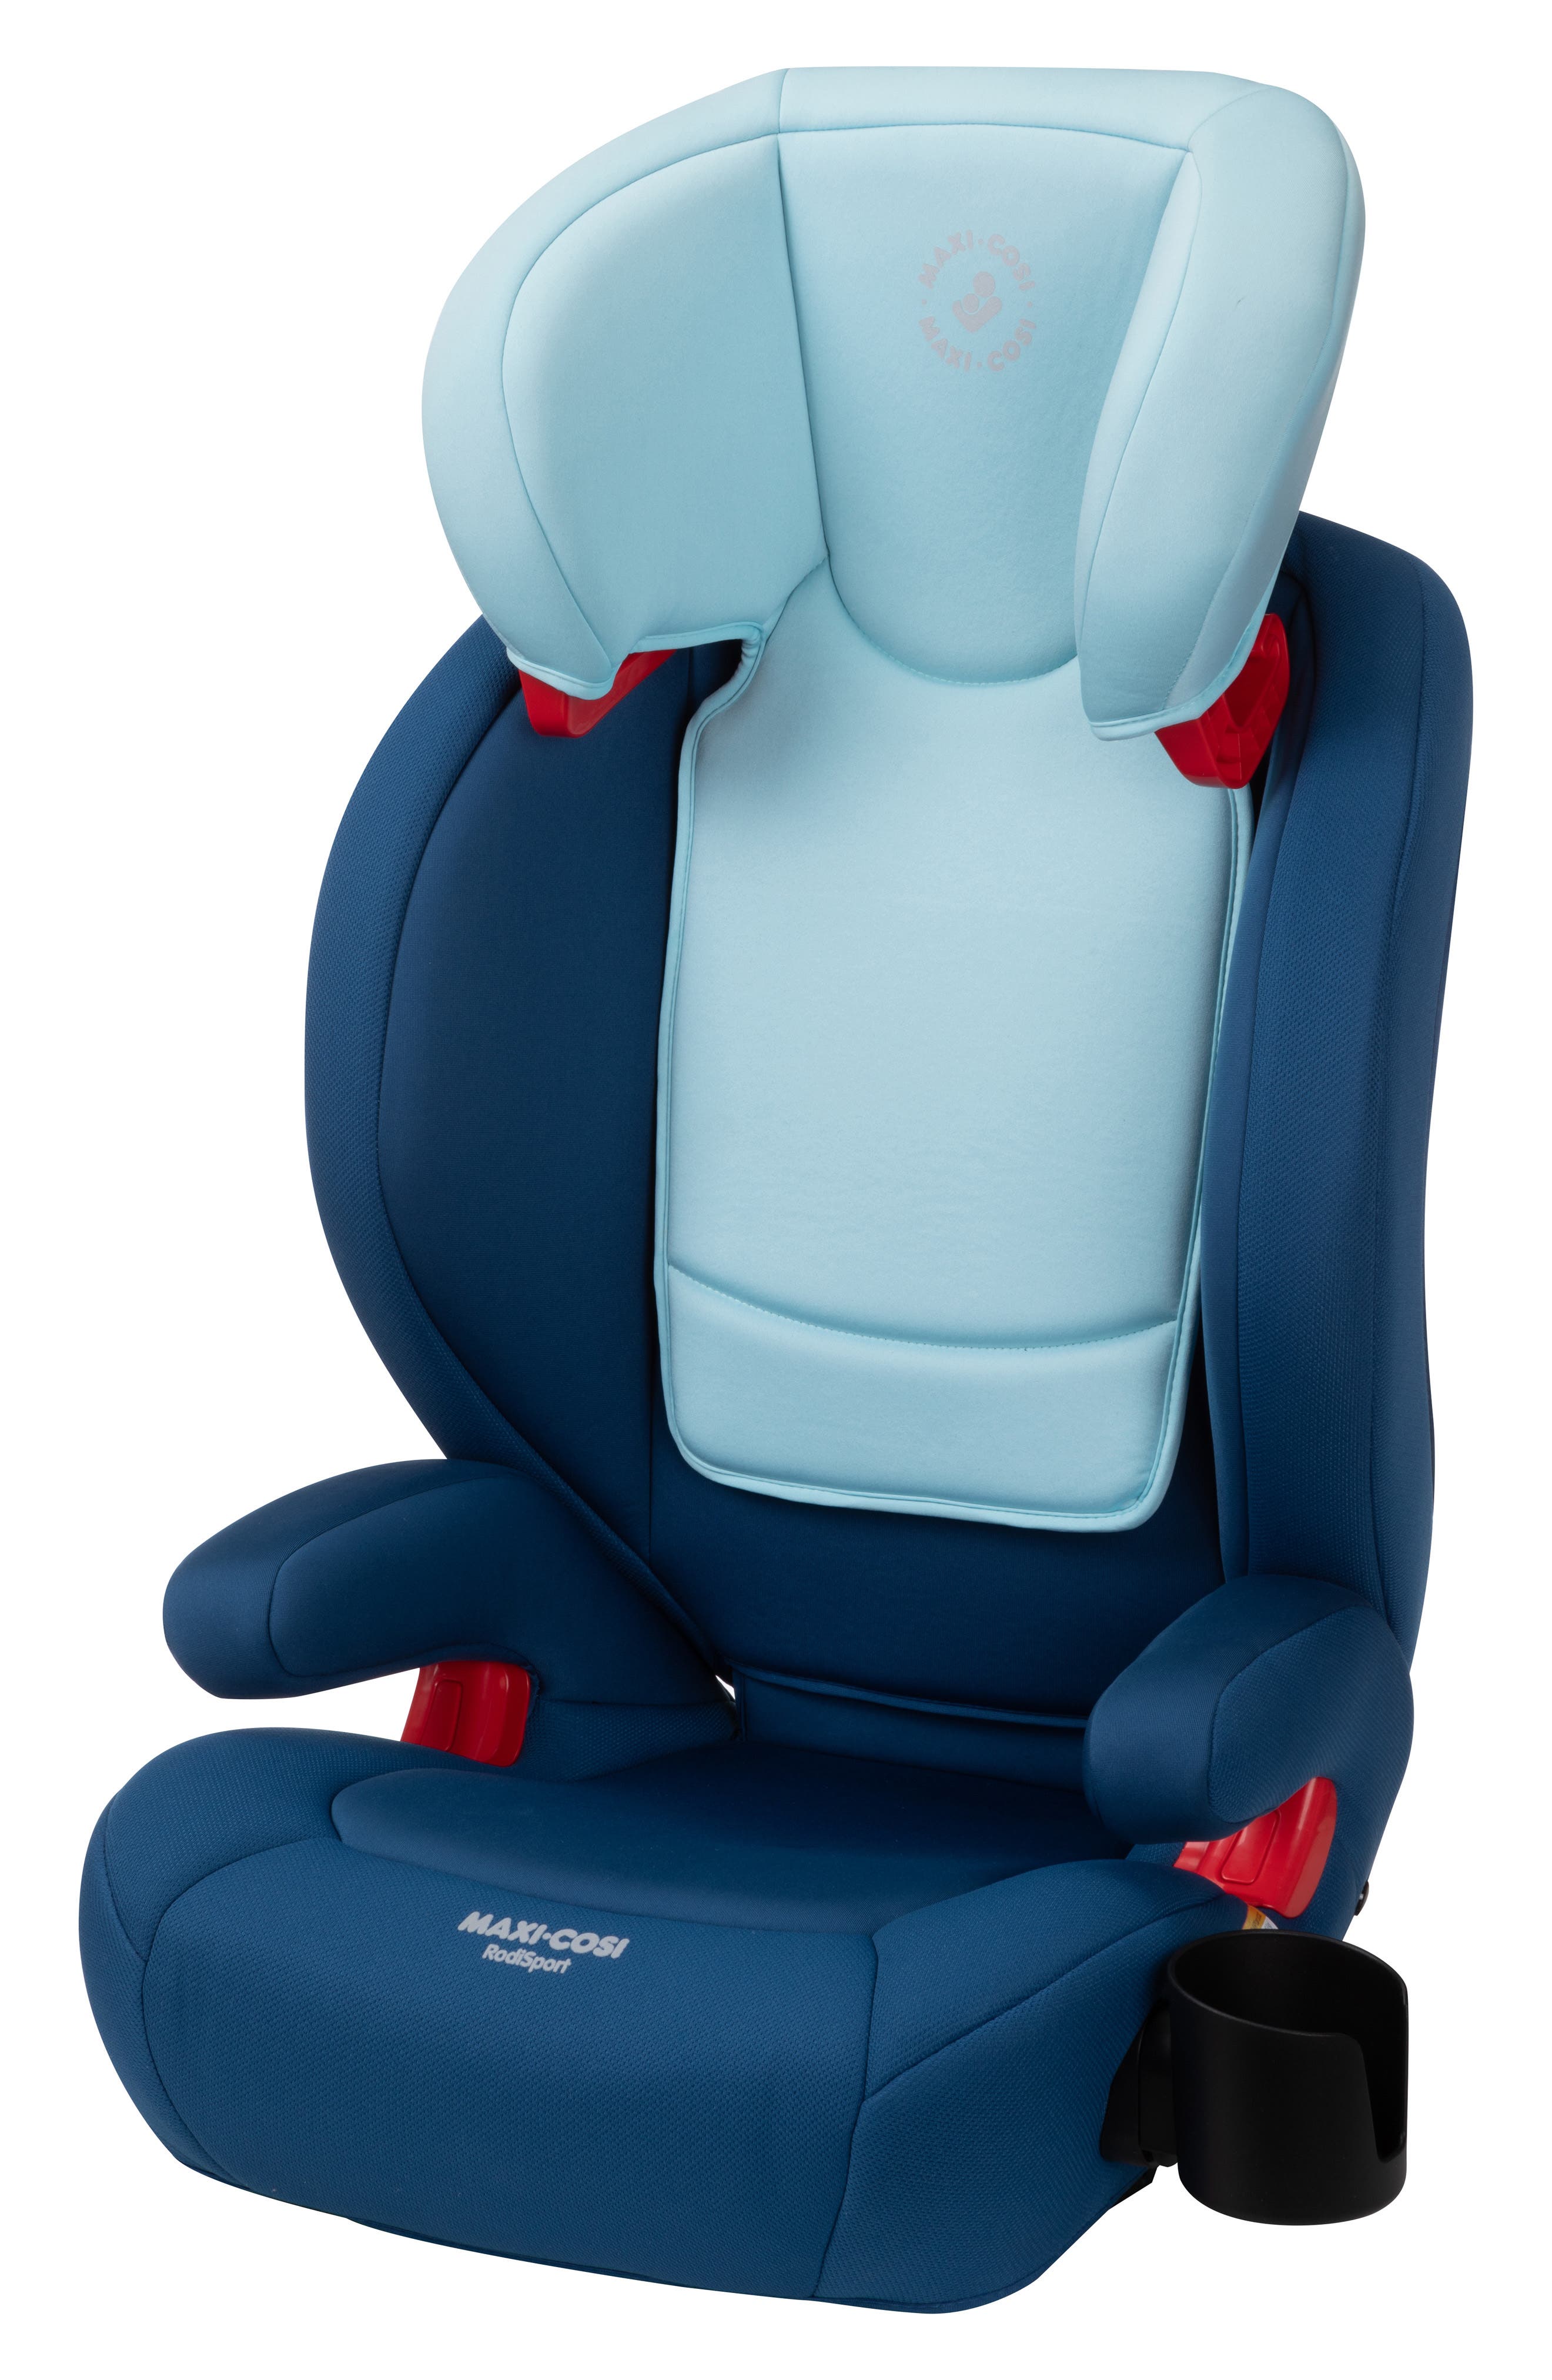 2 y 3 MOON-BEBE Universal Car Seat Cover Liner for Childs Group 1 BLUE